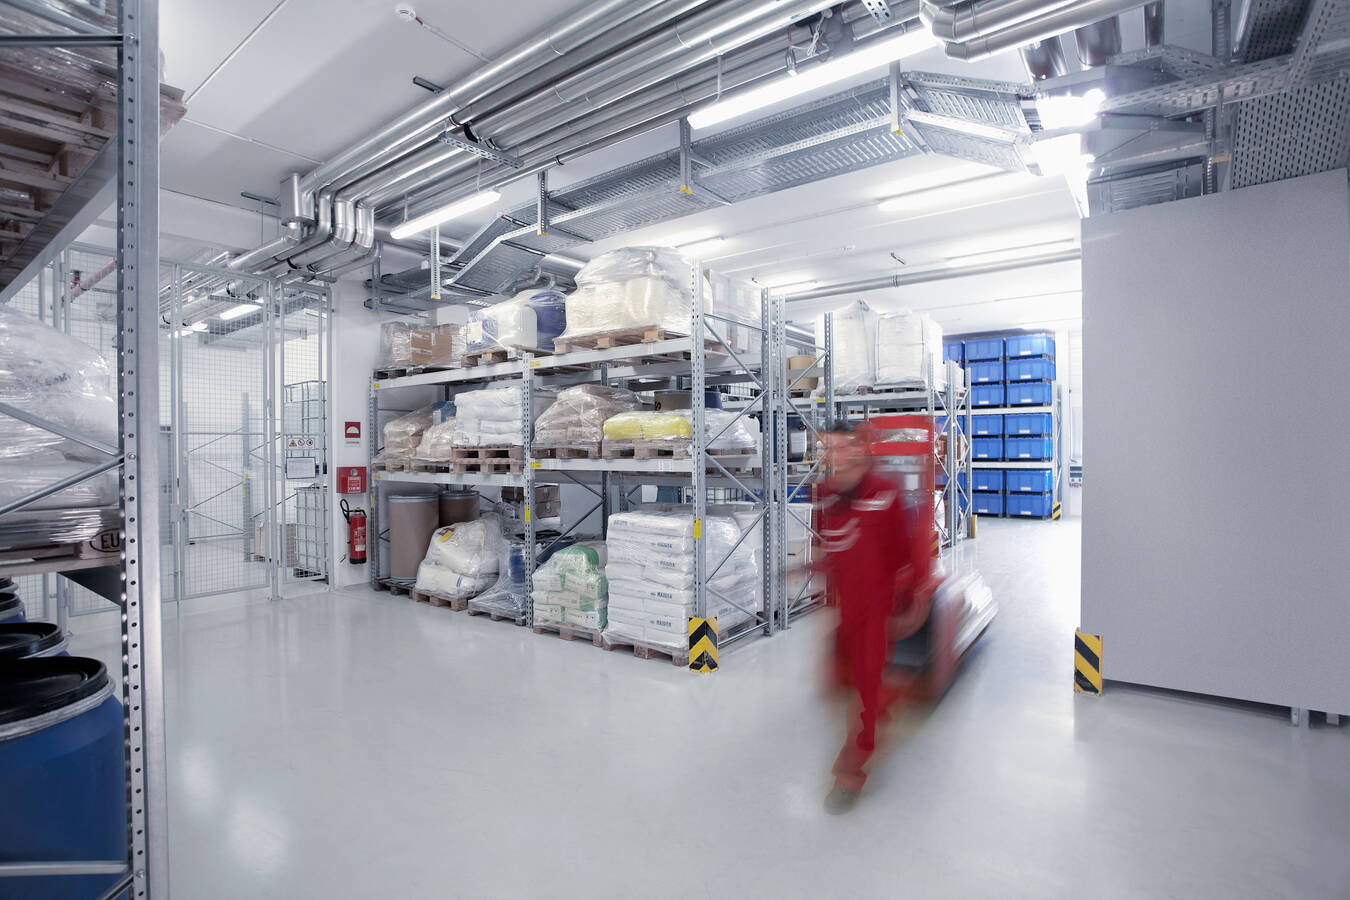 Figure3: Logistics and storage form part of contract manufacturing facilities in the Glatt Technology Centre Weimar, Germany.